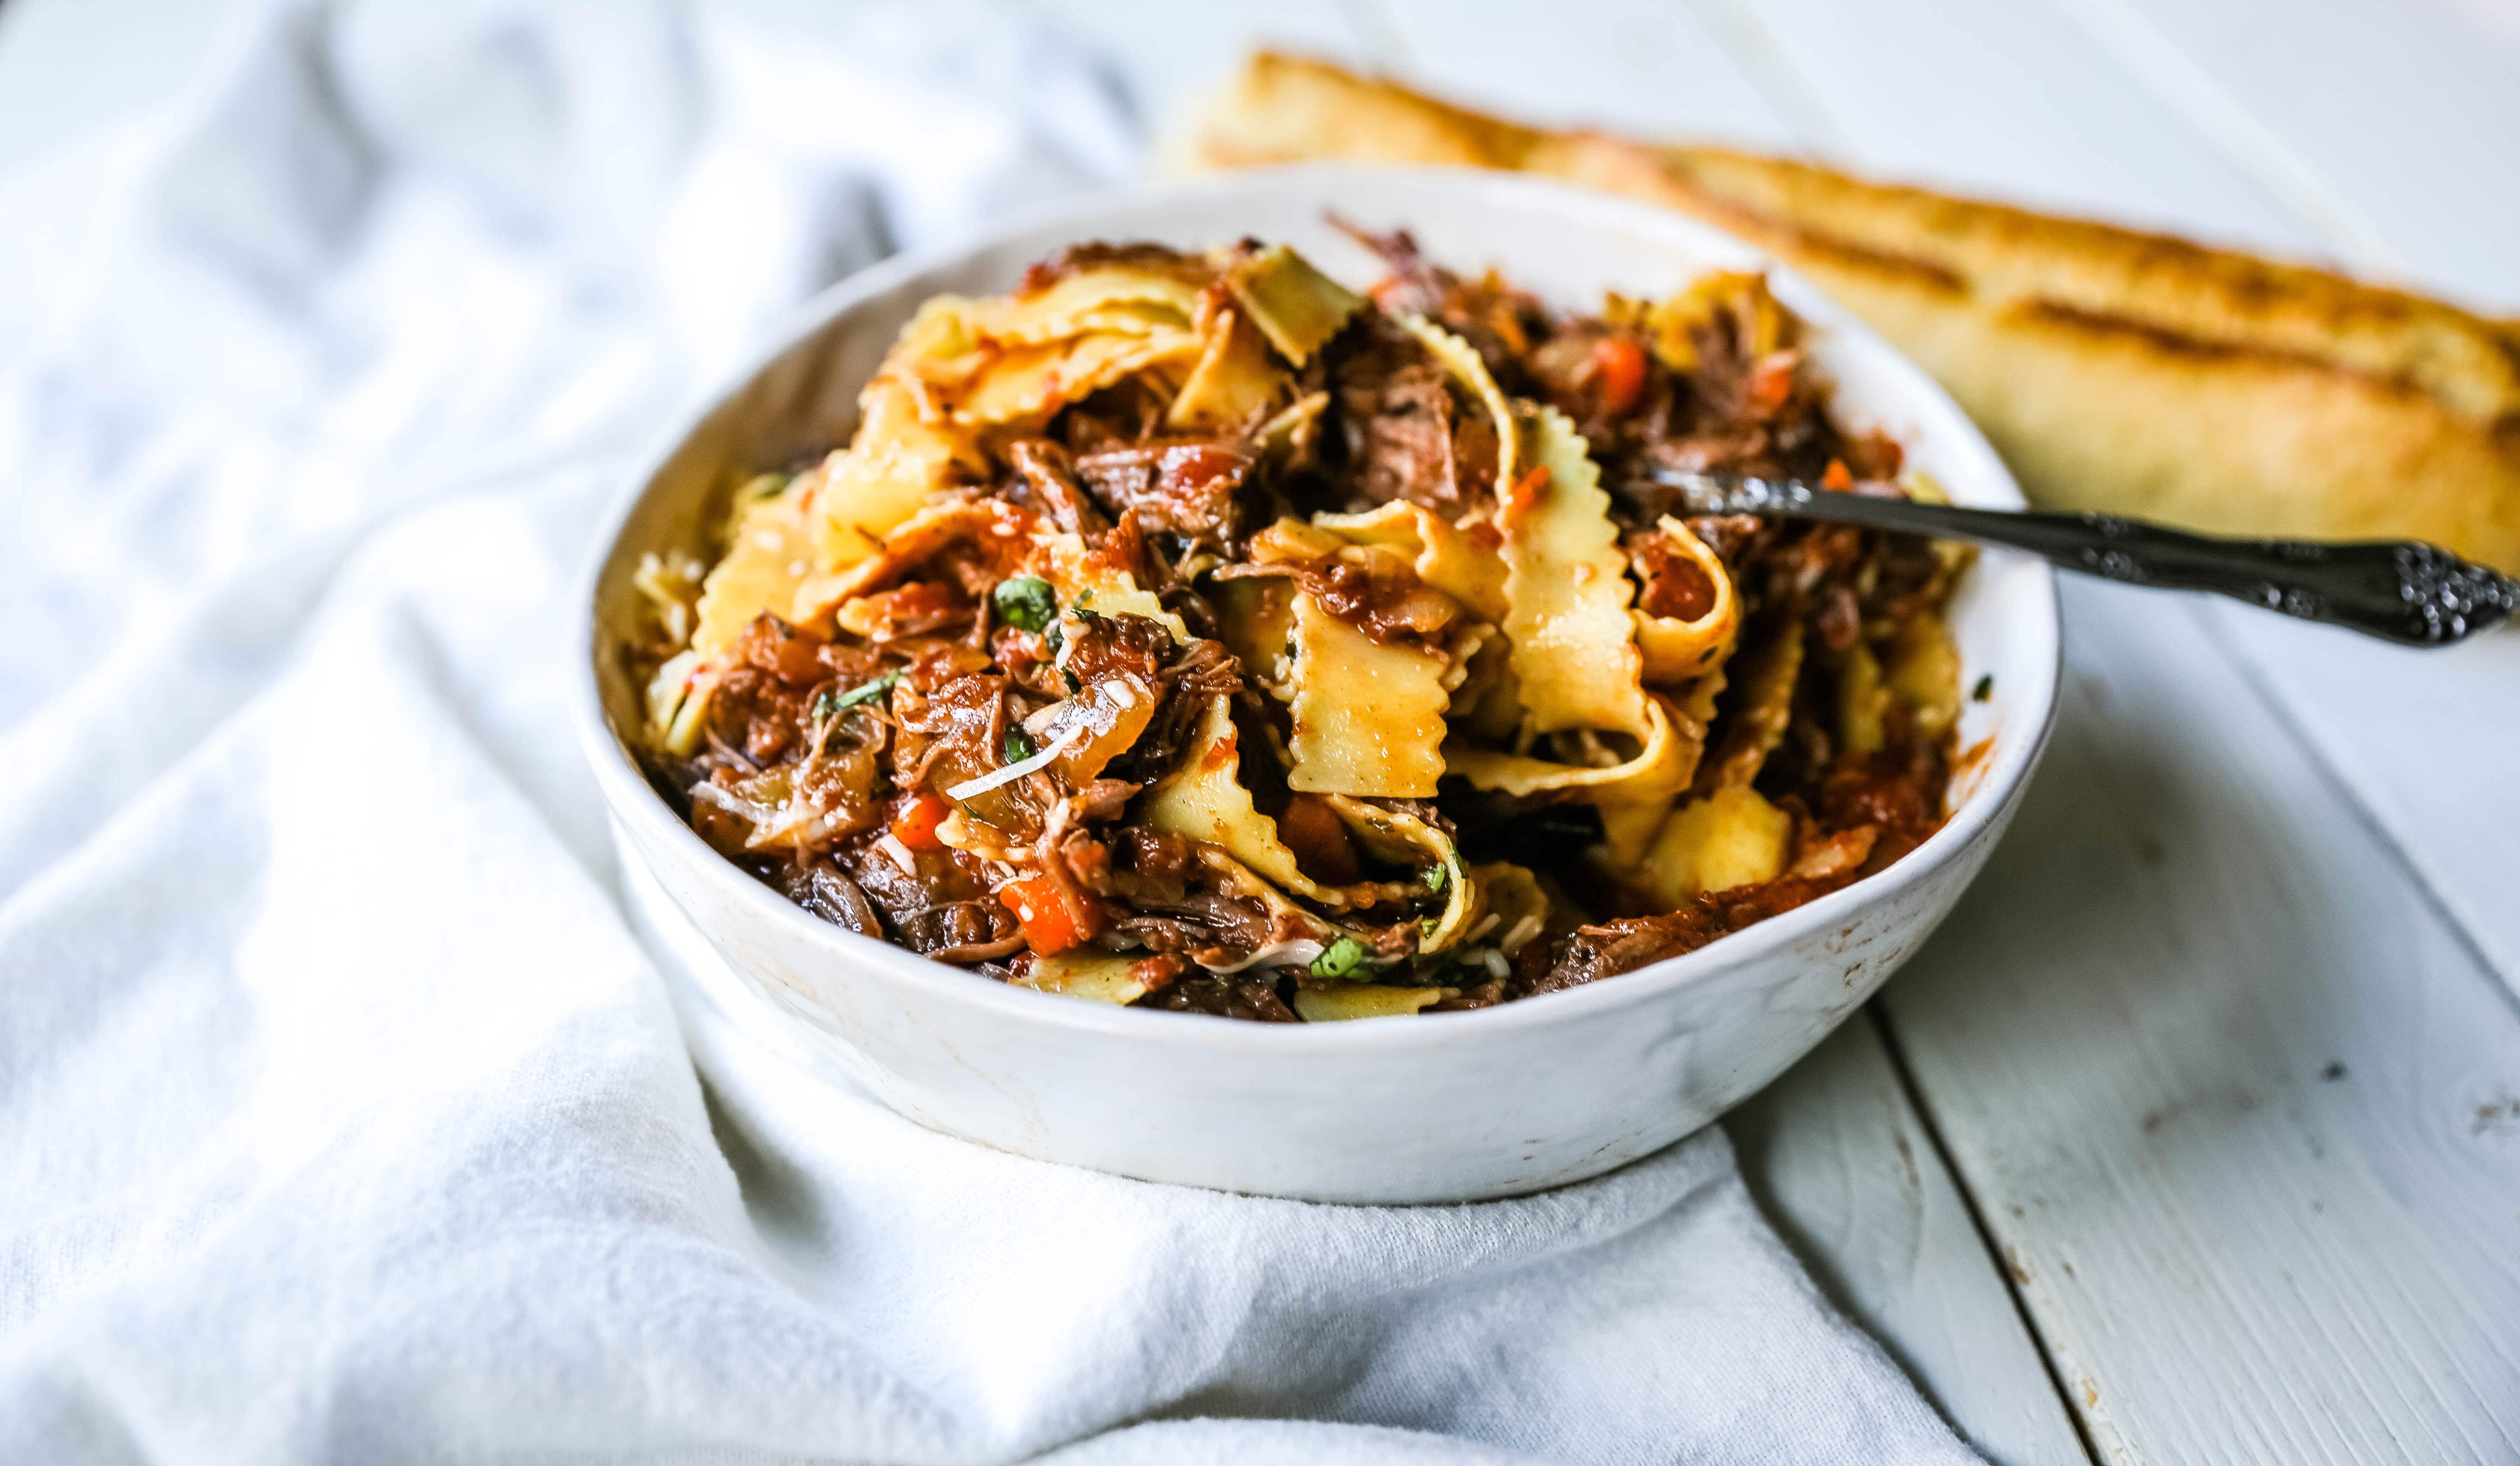 Sunday Slow Cooker Beef Ragu. Authentic Italian Beef Ragu. The ultimate comfort food! A big bowl of slow cooked, braised beef in a rich, robust tomato sauce tossed with pasta. I guarantee that you will go back for seconds! www.modernhoney.com #slowcooker #beefragu #italianfood #italian